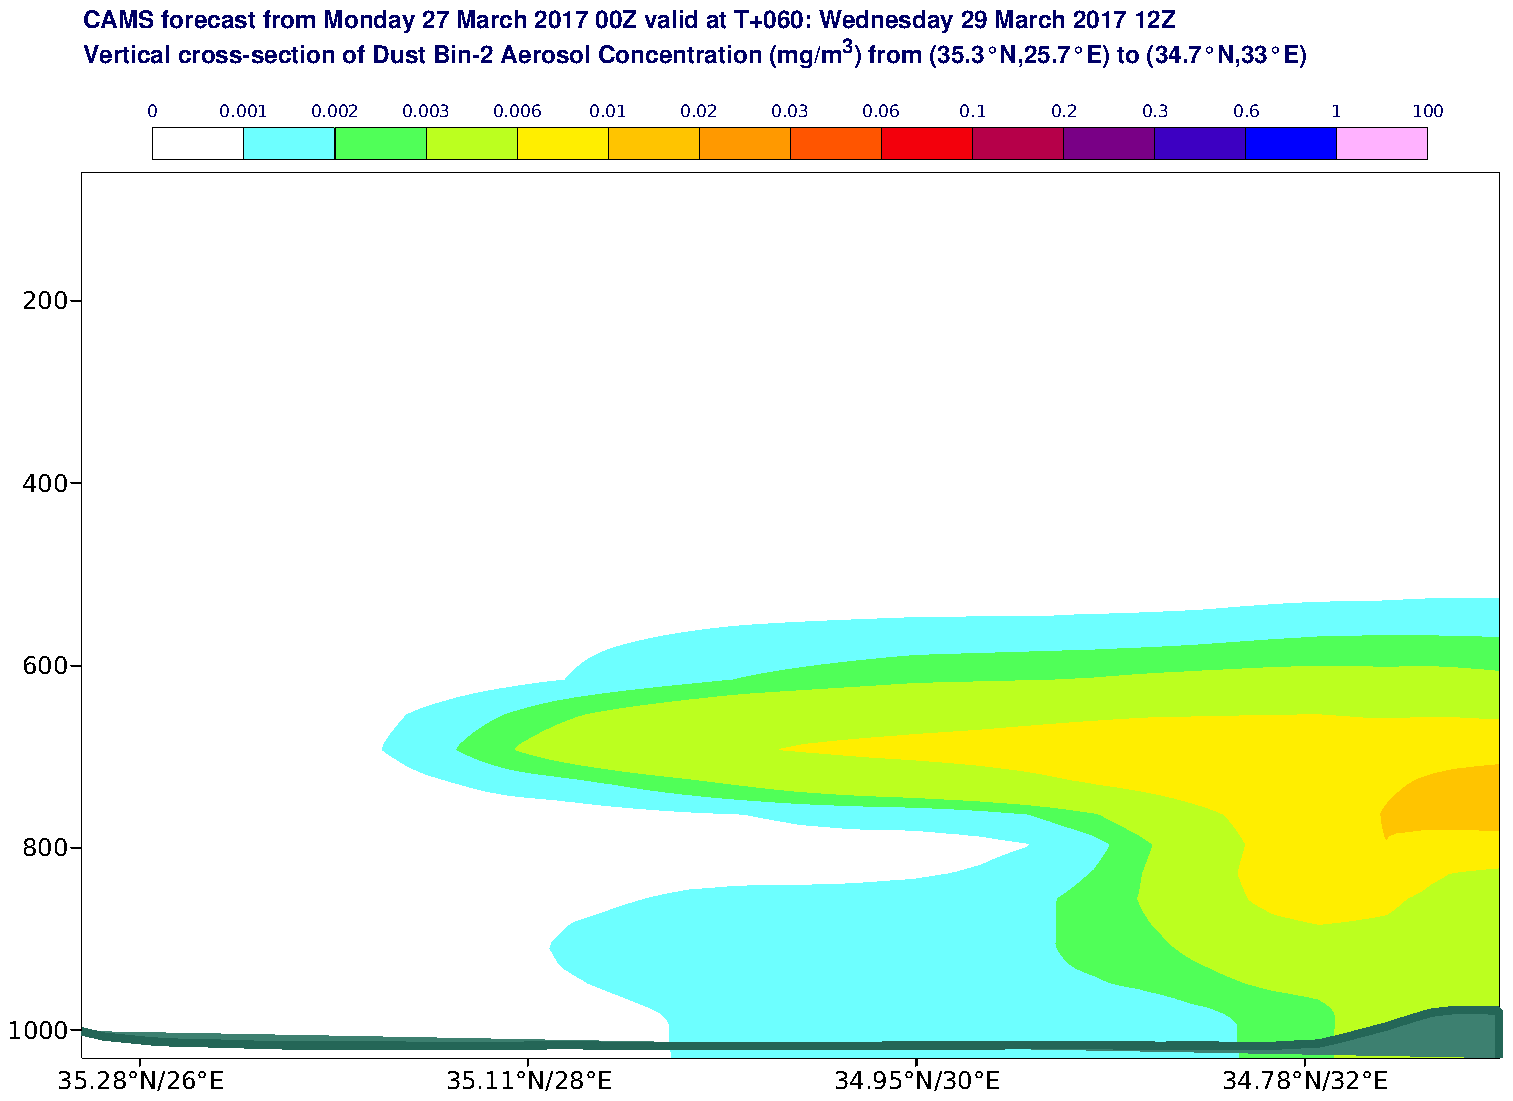 Vertical cross-section of Dust Bin-2 Aerosol Concentration (mg/m3) valid at T60 - 2017-03-29 12:00